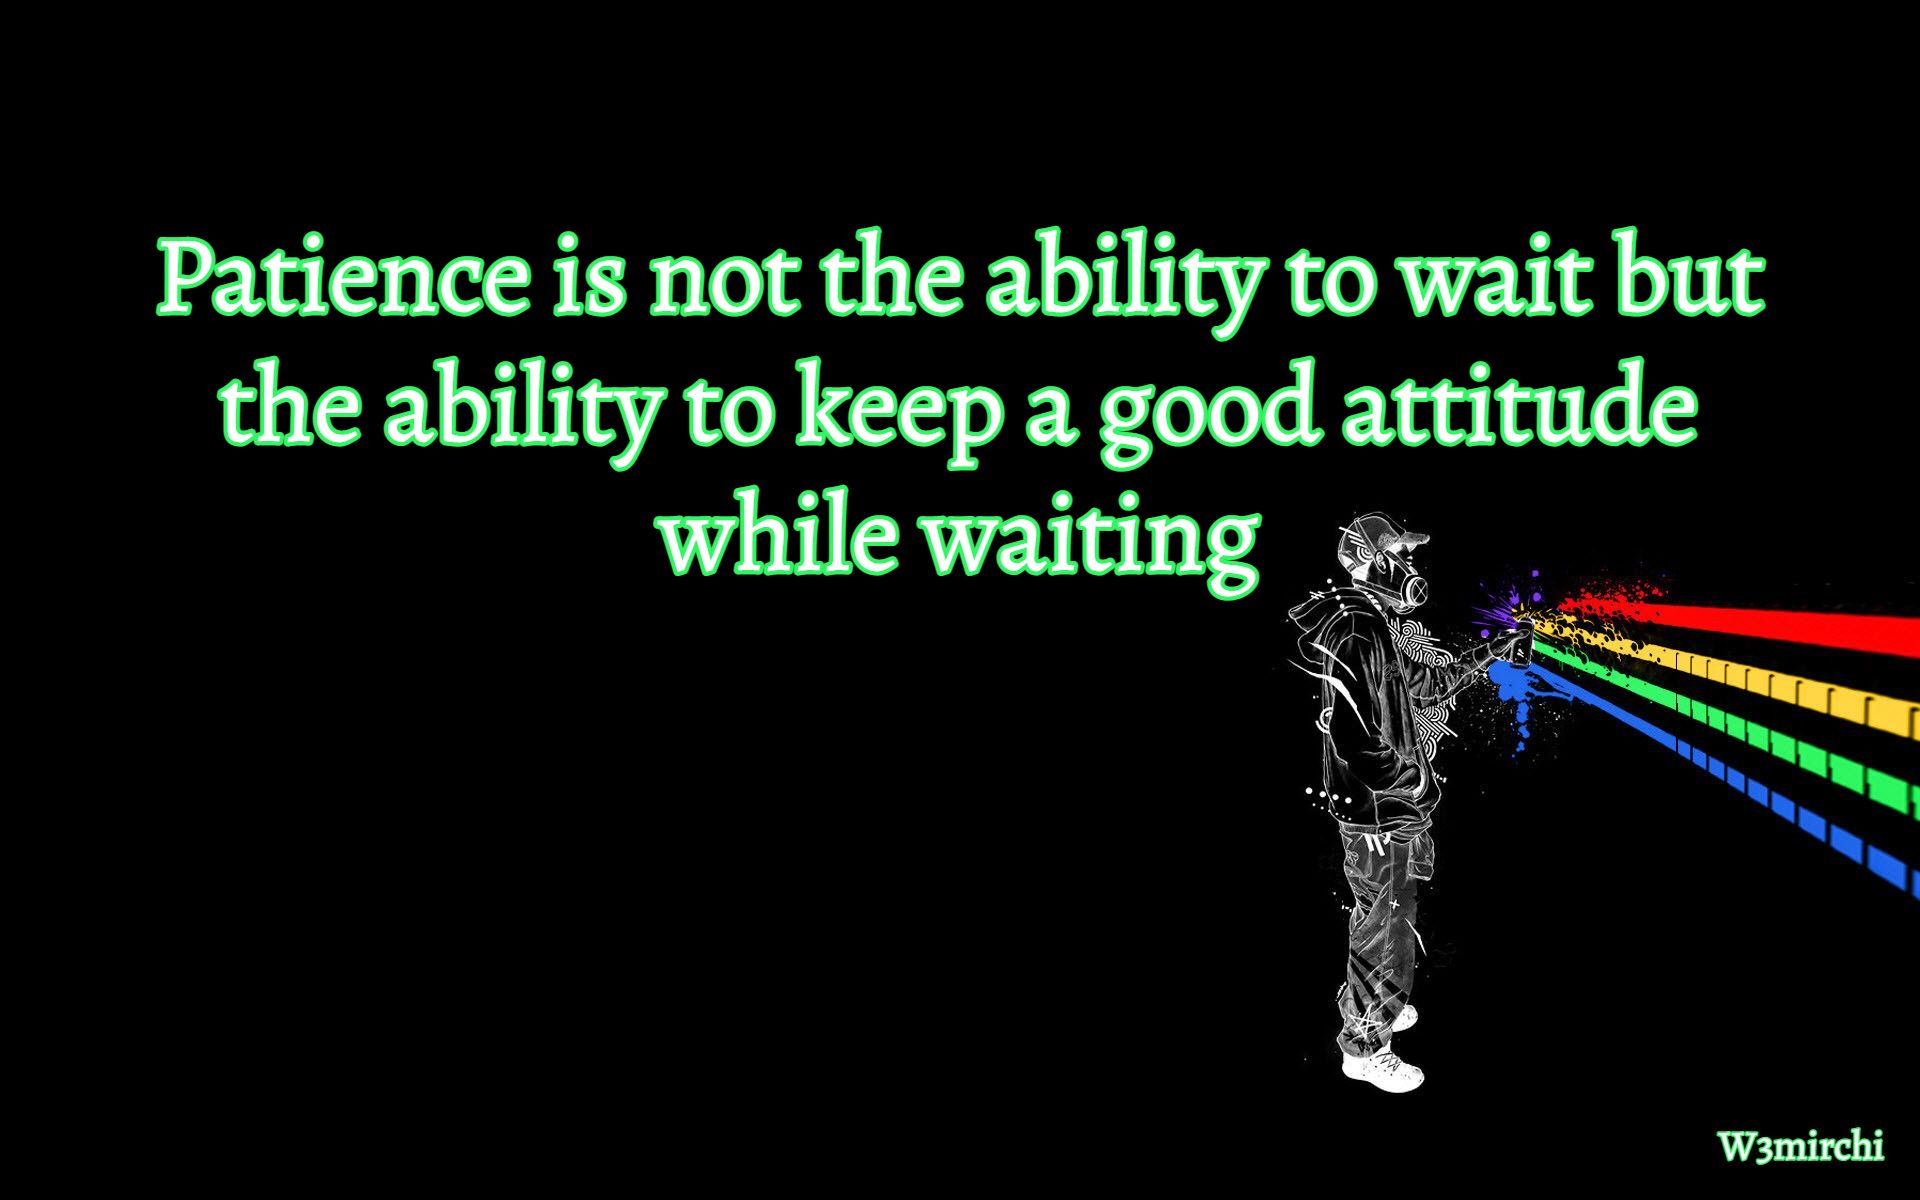 Patience is not the ability